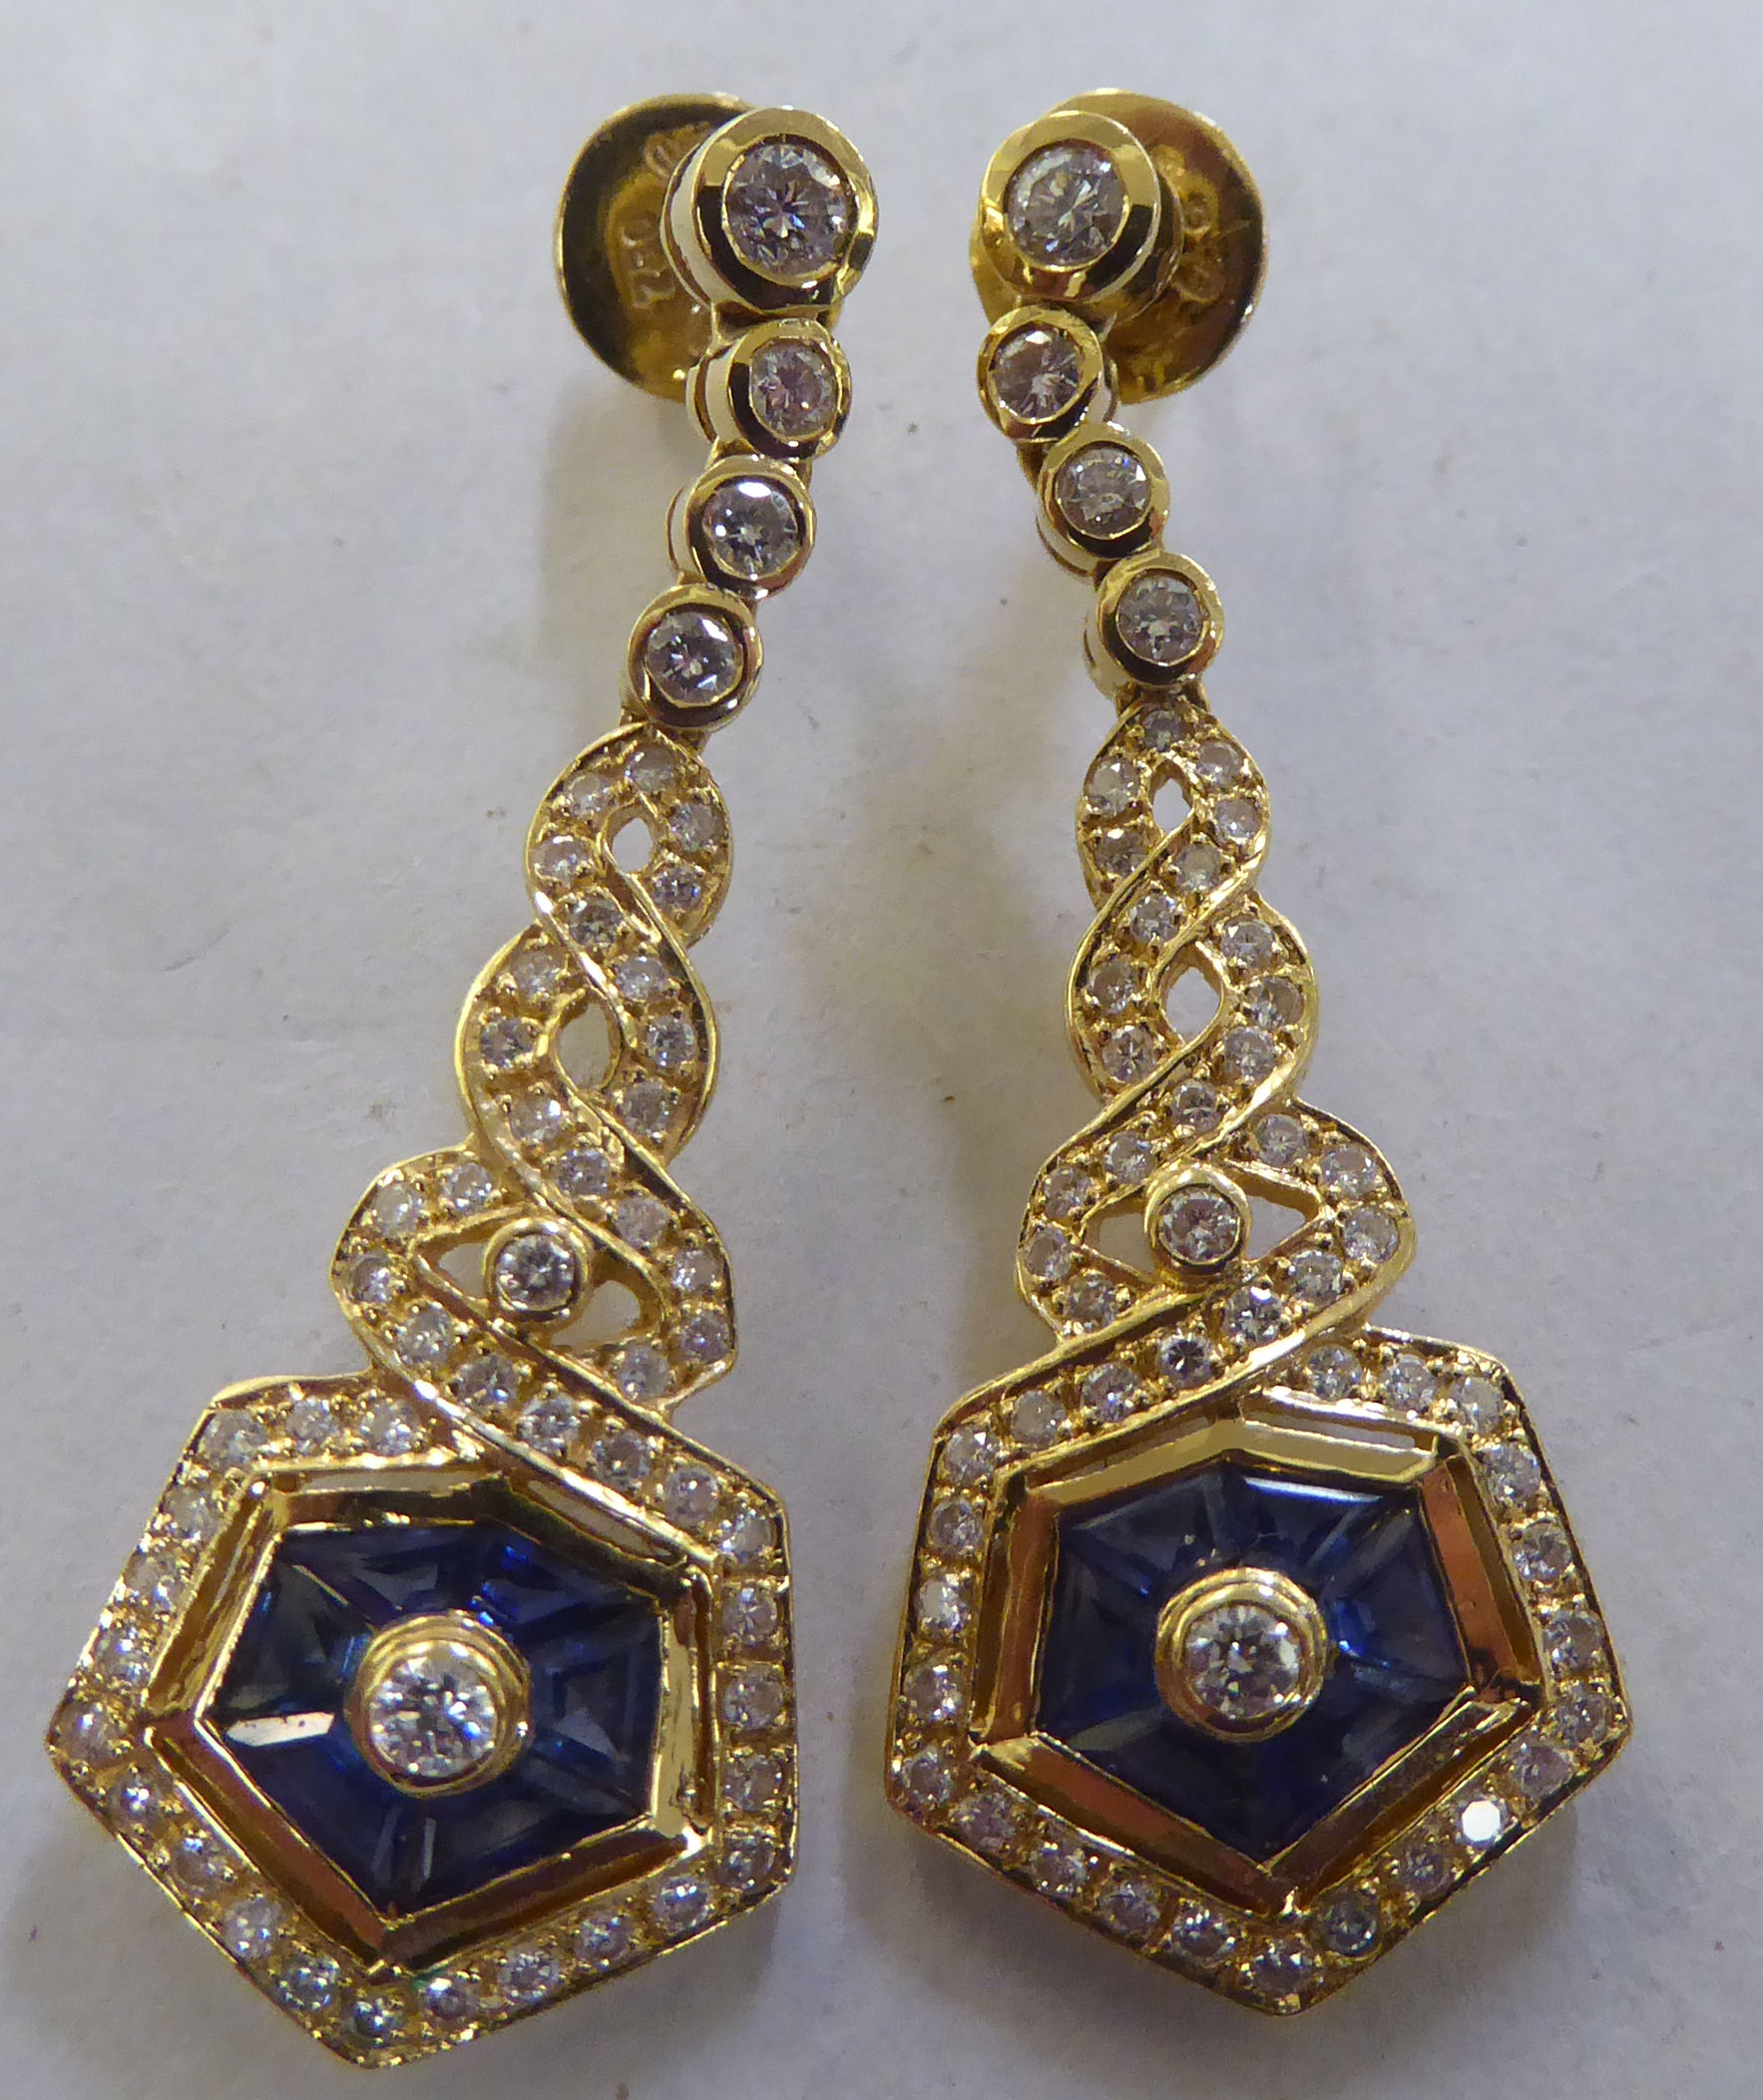 A pair of 18ct gold diamond and sapphire pendant earrings